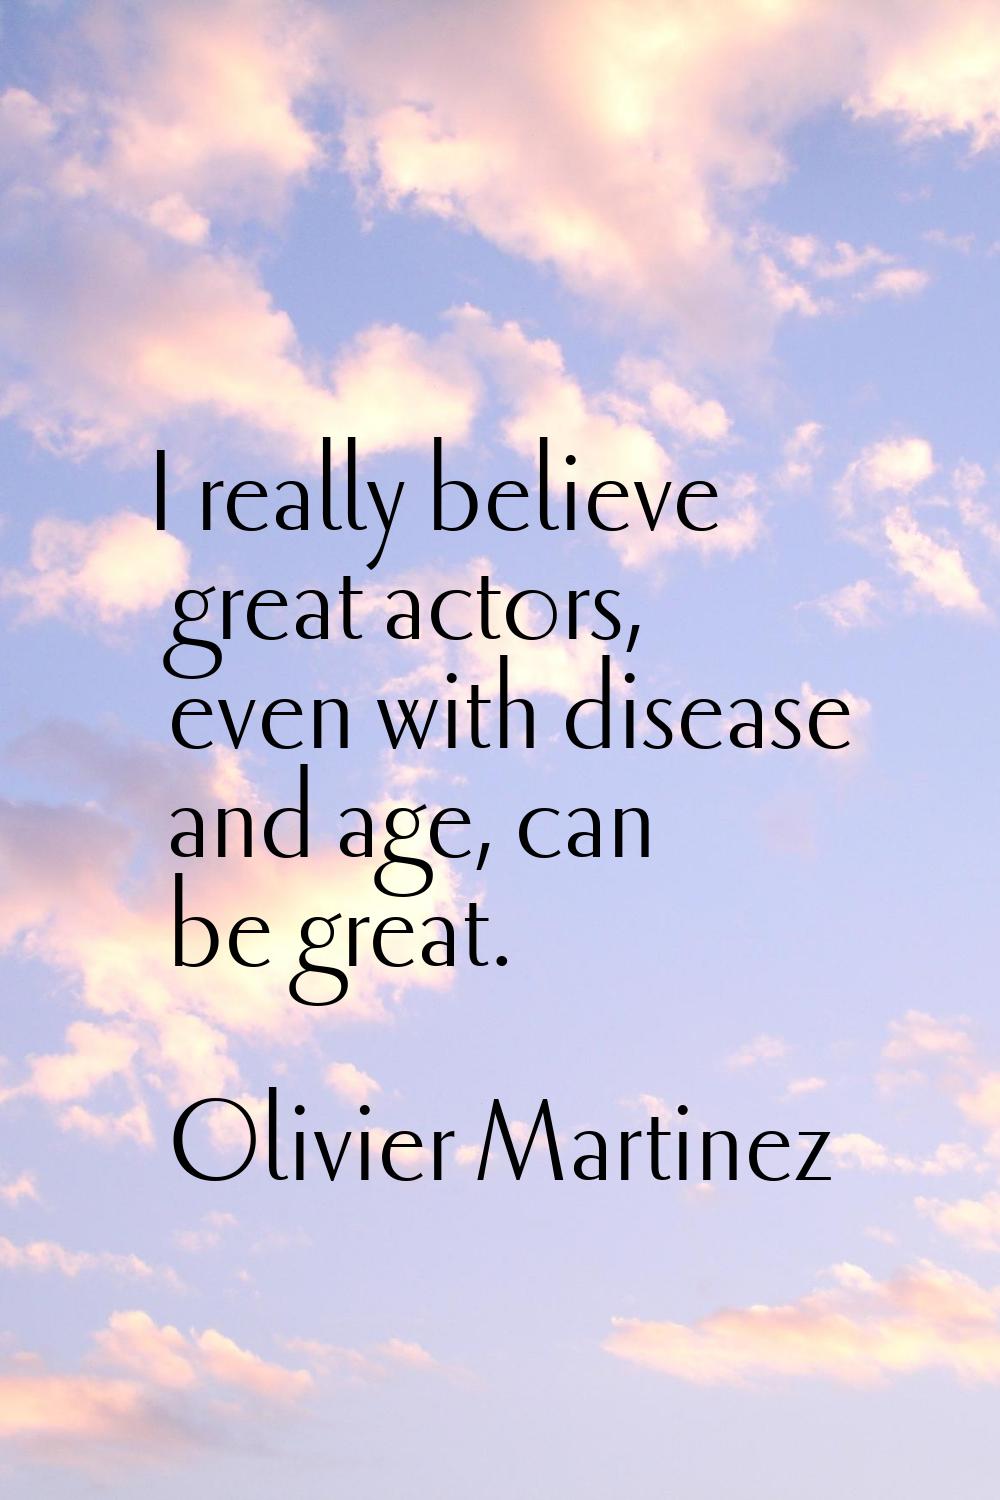 I really believe great actors, even with disease and age, can be great.